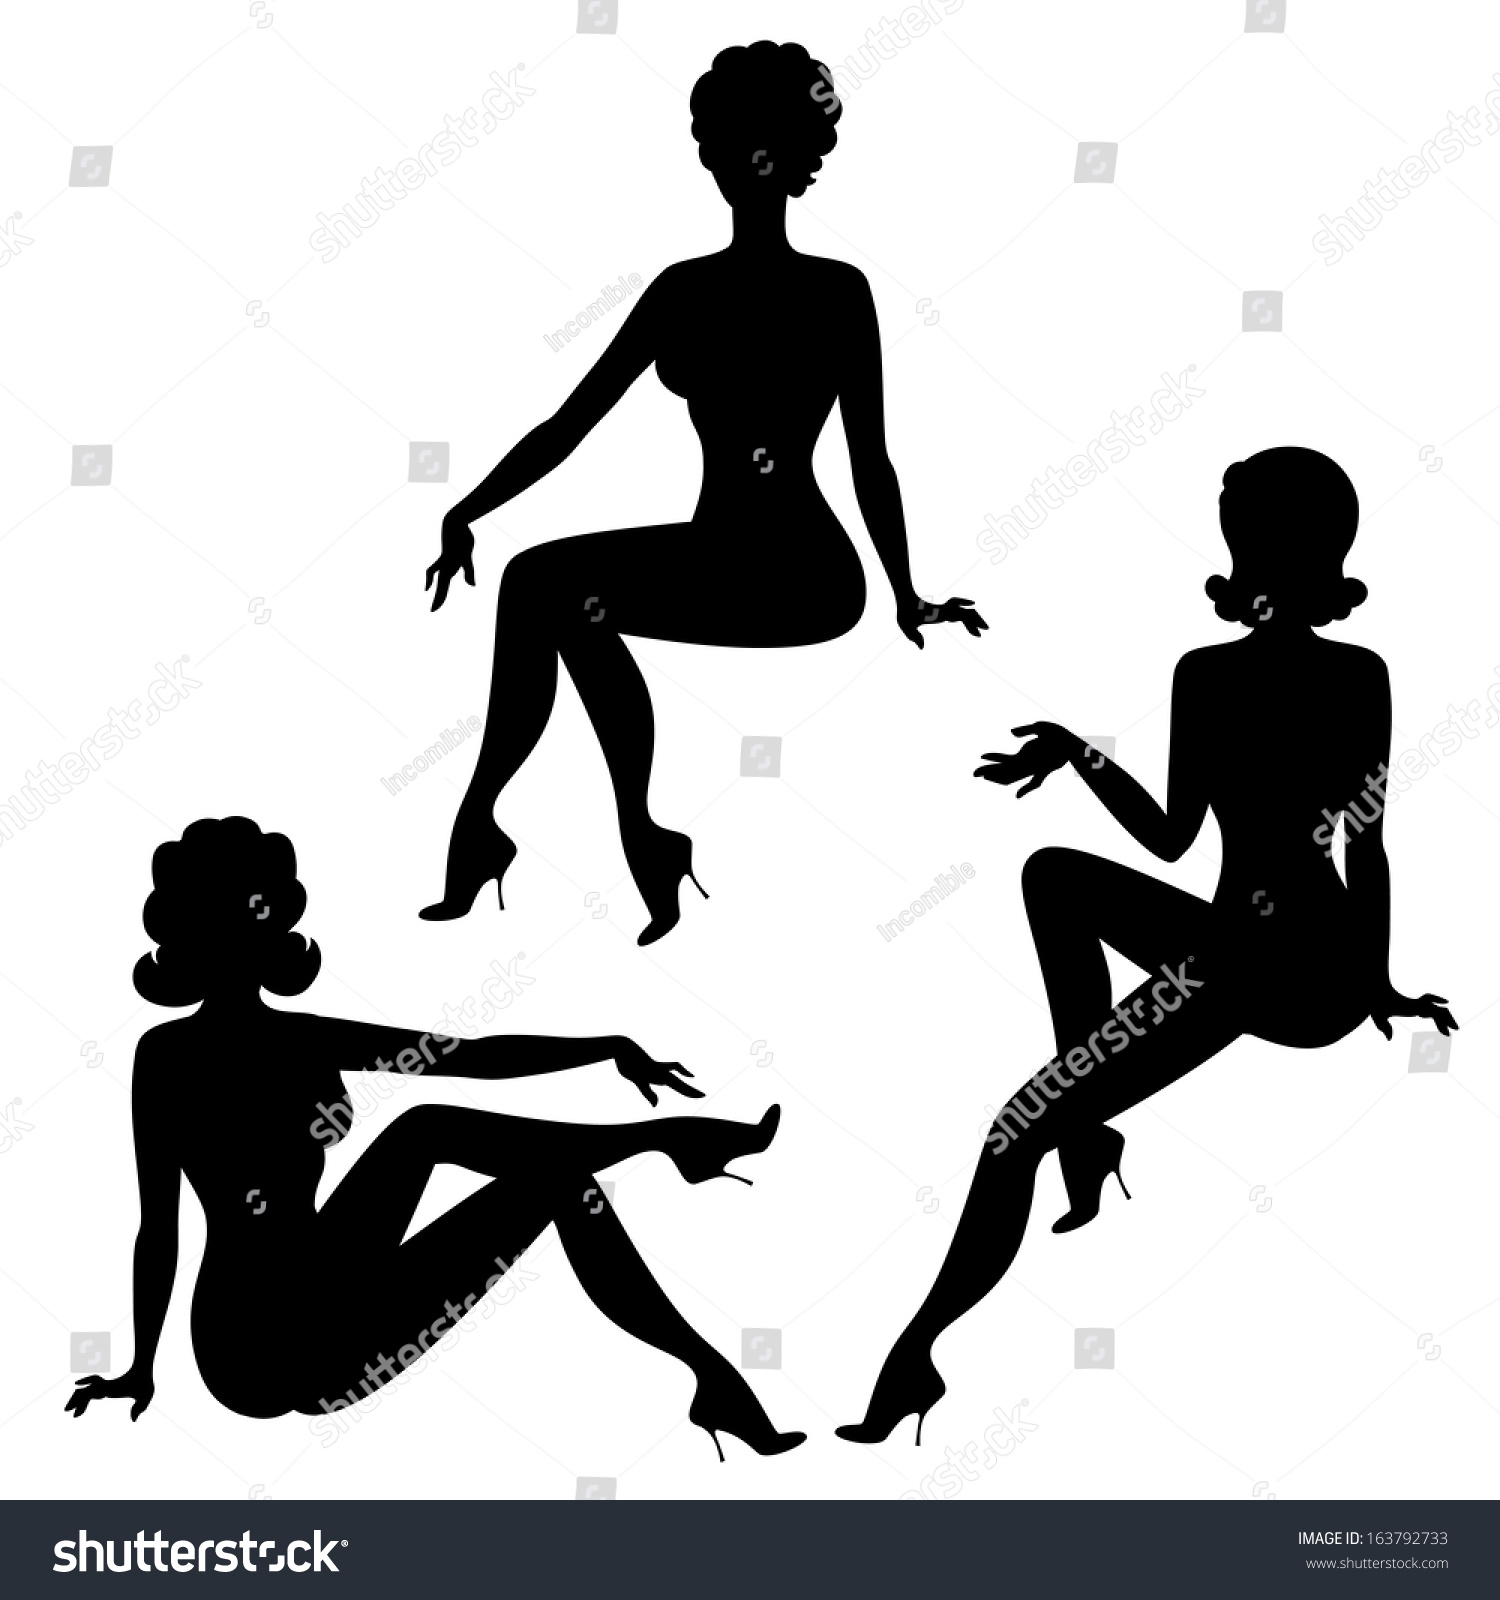 SVG of Silhouettes of beautiful pin up girls 1950s style. svg